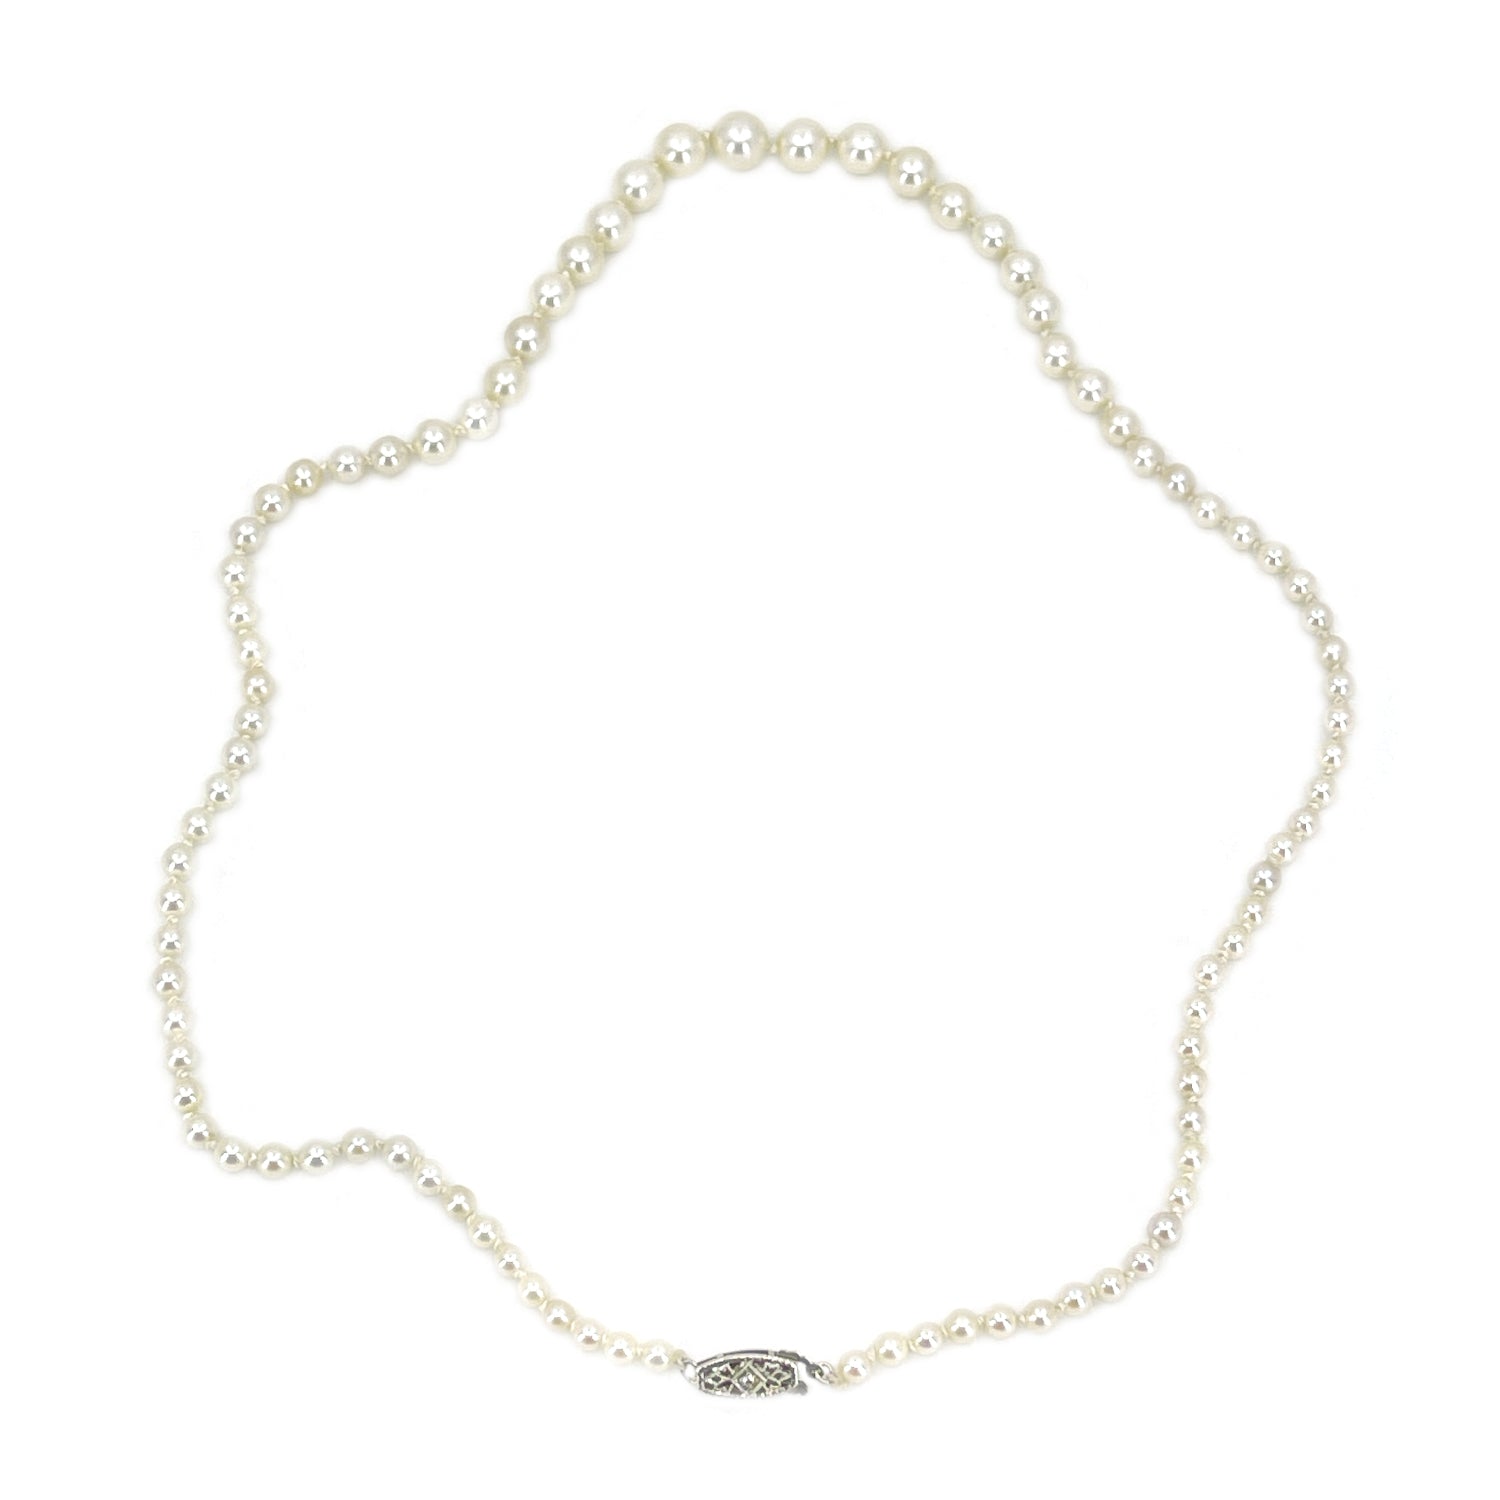 Natural Diamond Japanese Saltwater Cultured Akoya Graduated Pearl Vintage Necklace - 14K White Gold 16.50 Inch